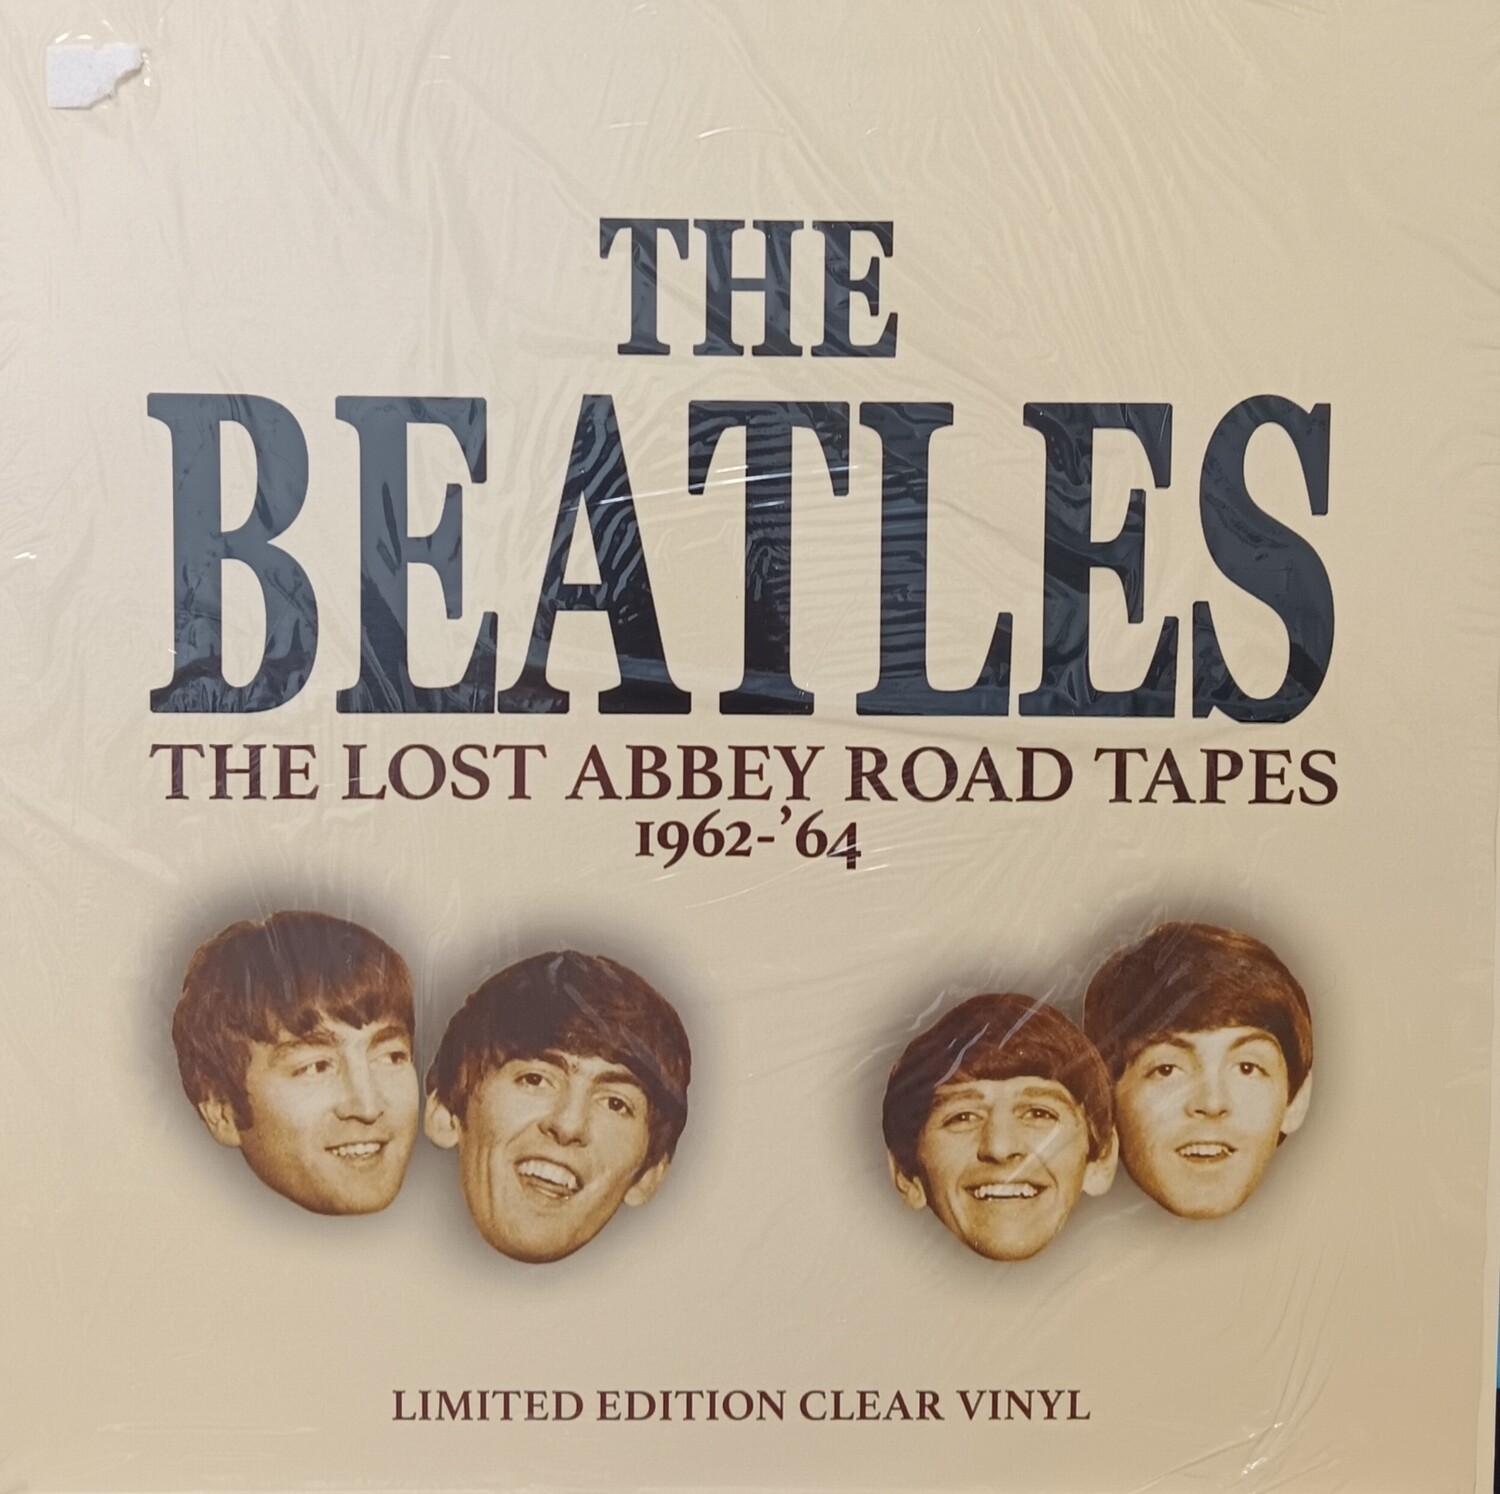 THE BEATLES - The lost Abbey Road Tapes 1962-1964 (Clear)